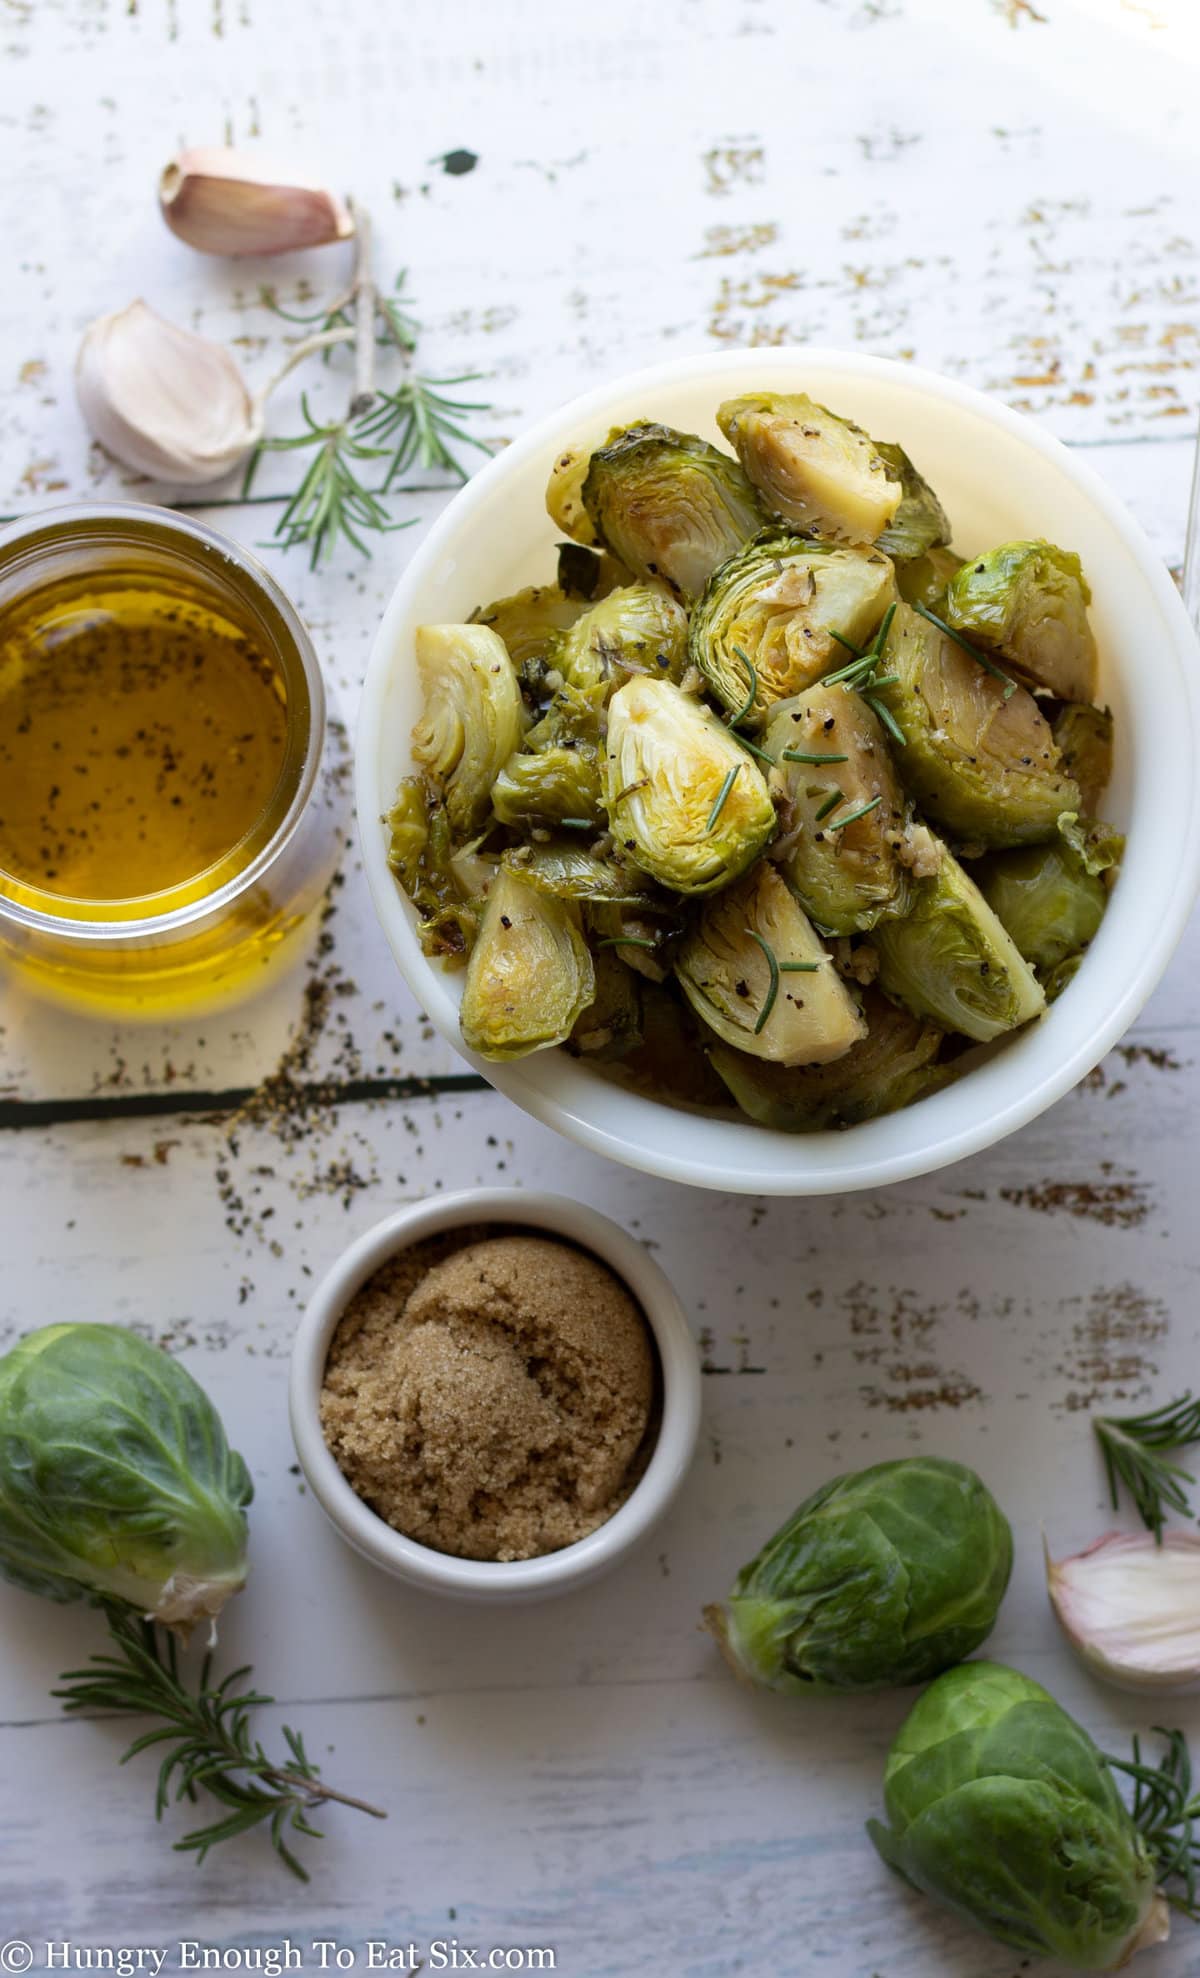 Brussels sprouts roasted in a bowl next to olive oil.